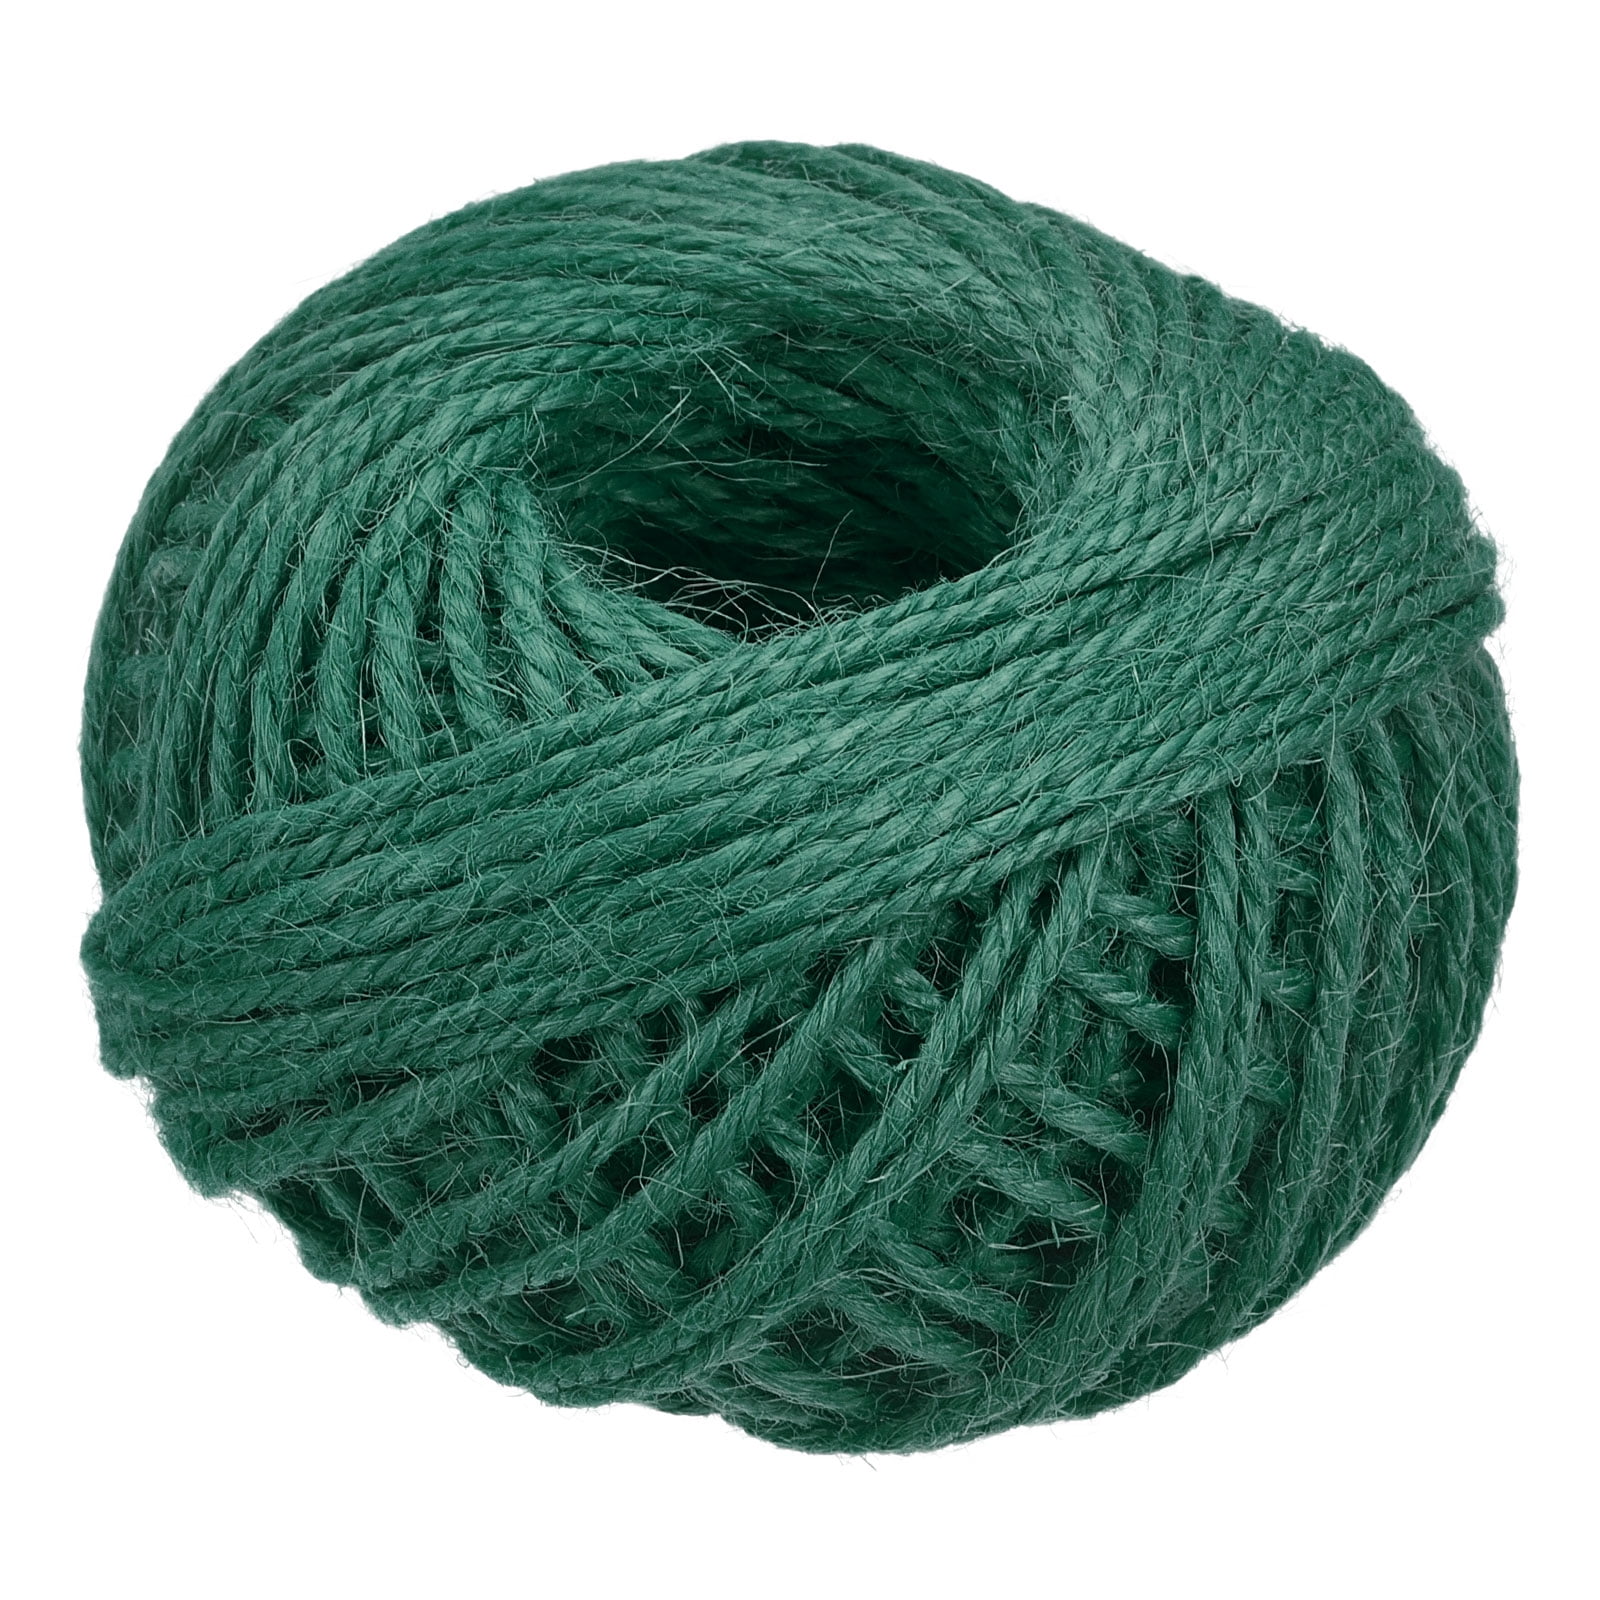 Uxcell 328 Feet 2mm Garden Twine Jute Twine String for DIY Projects, Dark  Green 2 Pack 